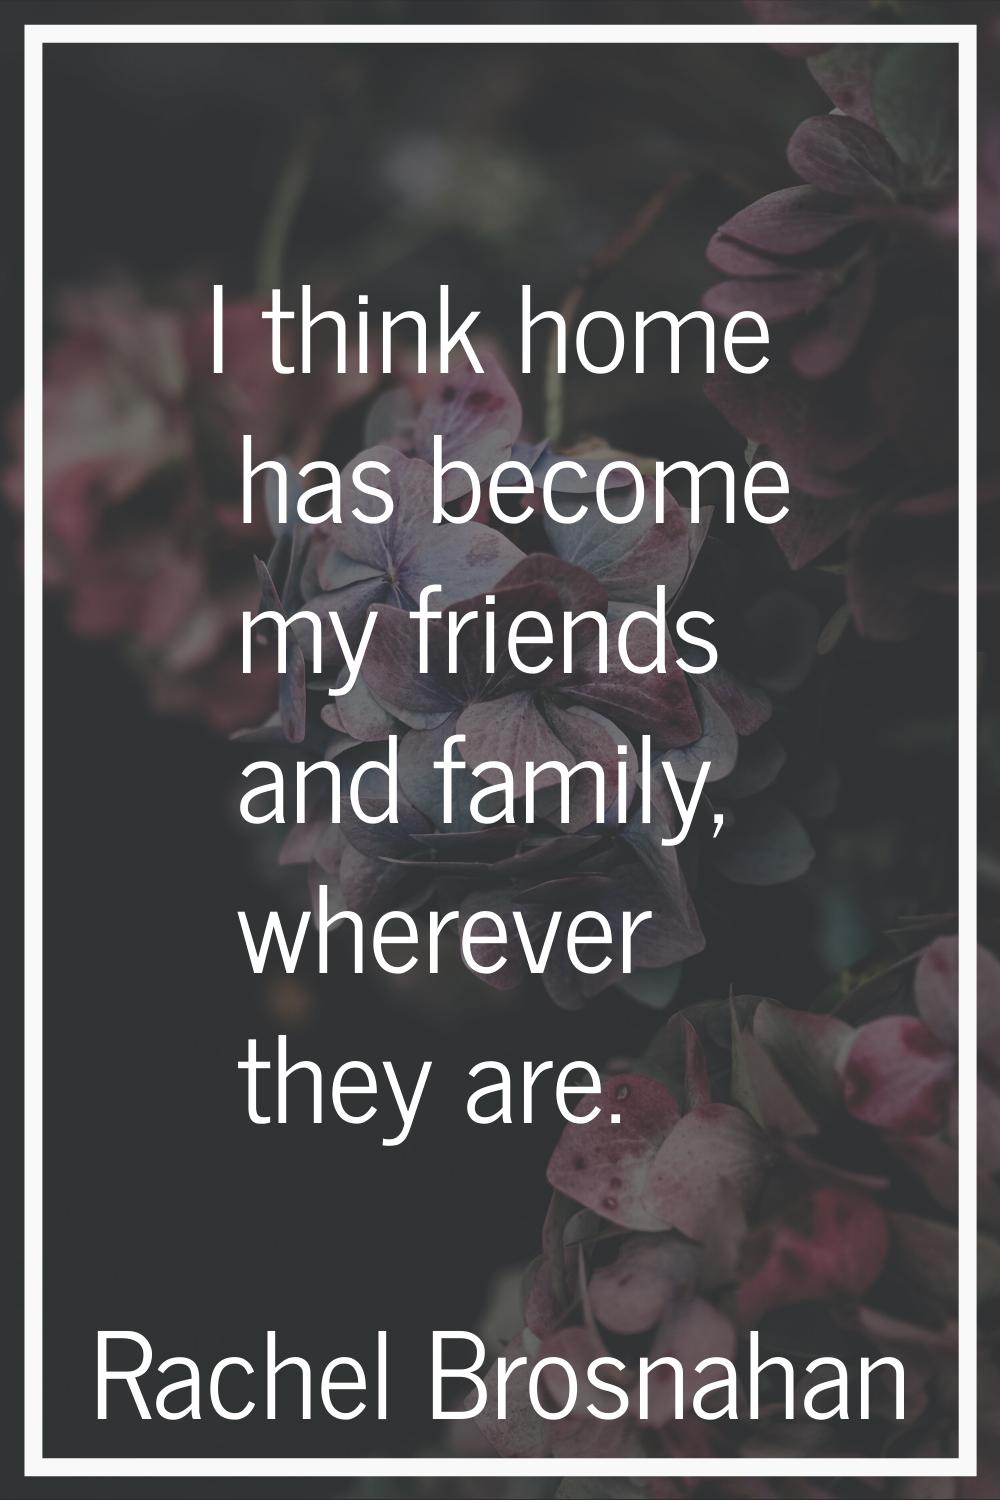 I think home has become my friends and family, wherever they are.